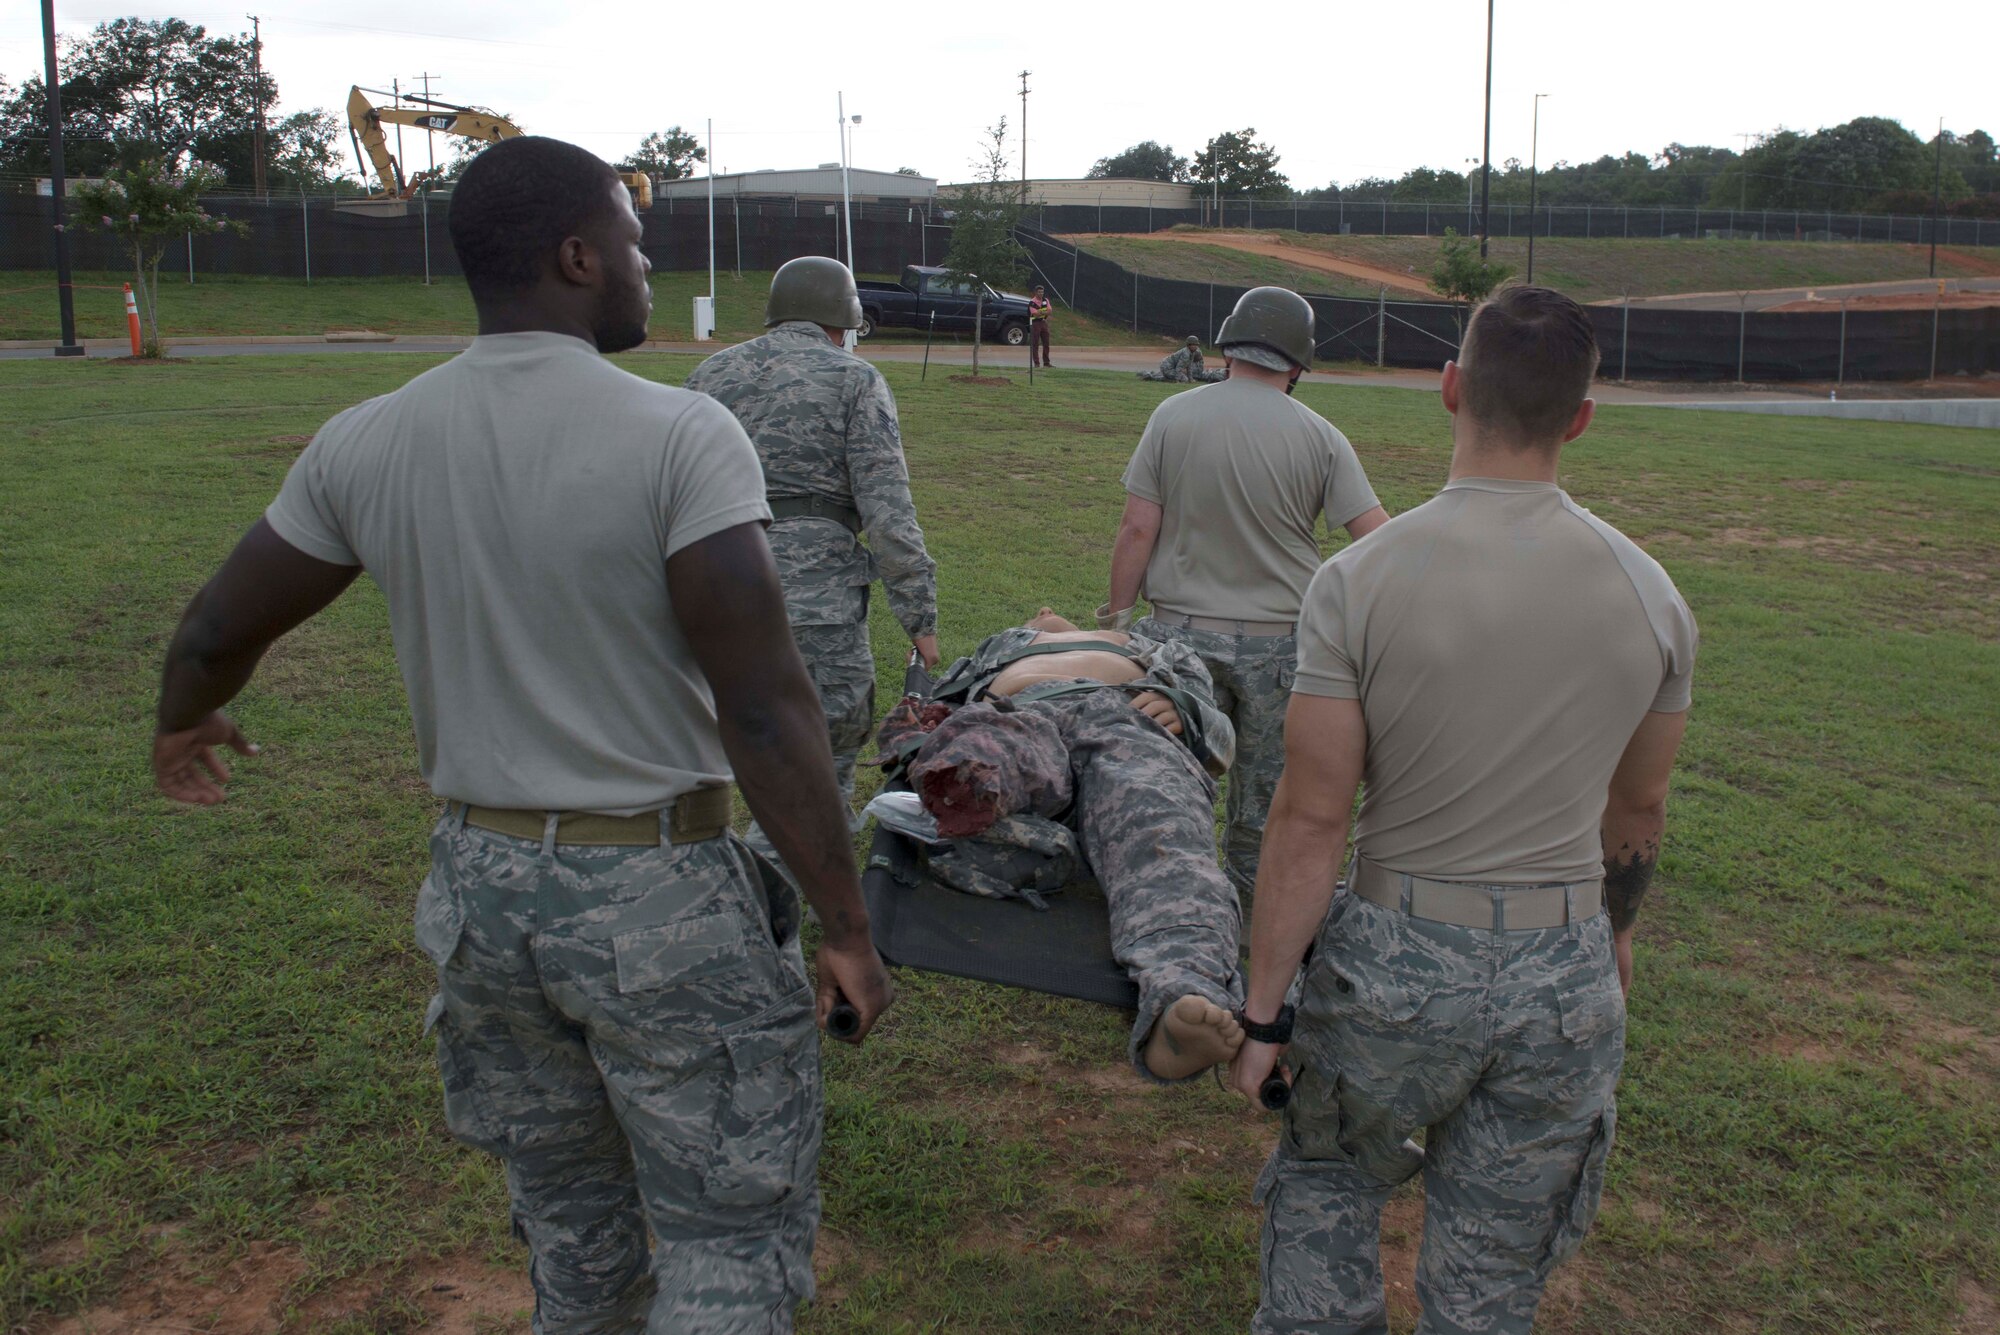 U.S. Airmen assigned to the 20th Medical Group carry a simulated patient during an exercise at Shaw Air Force Base, S.C., Aug. 2, 2018.